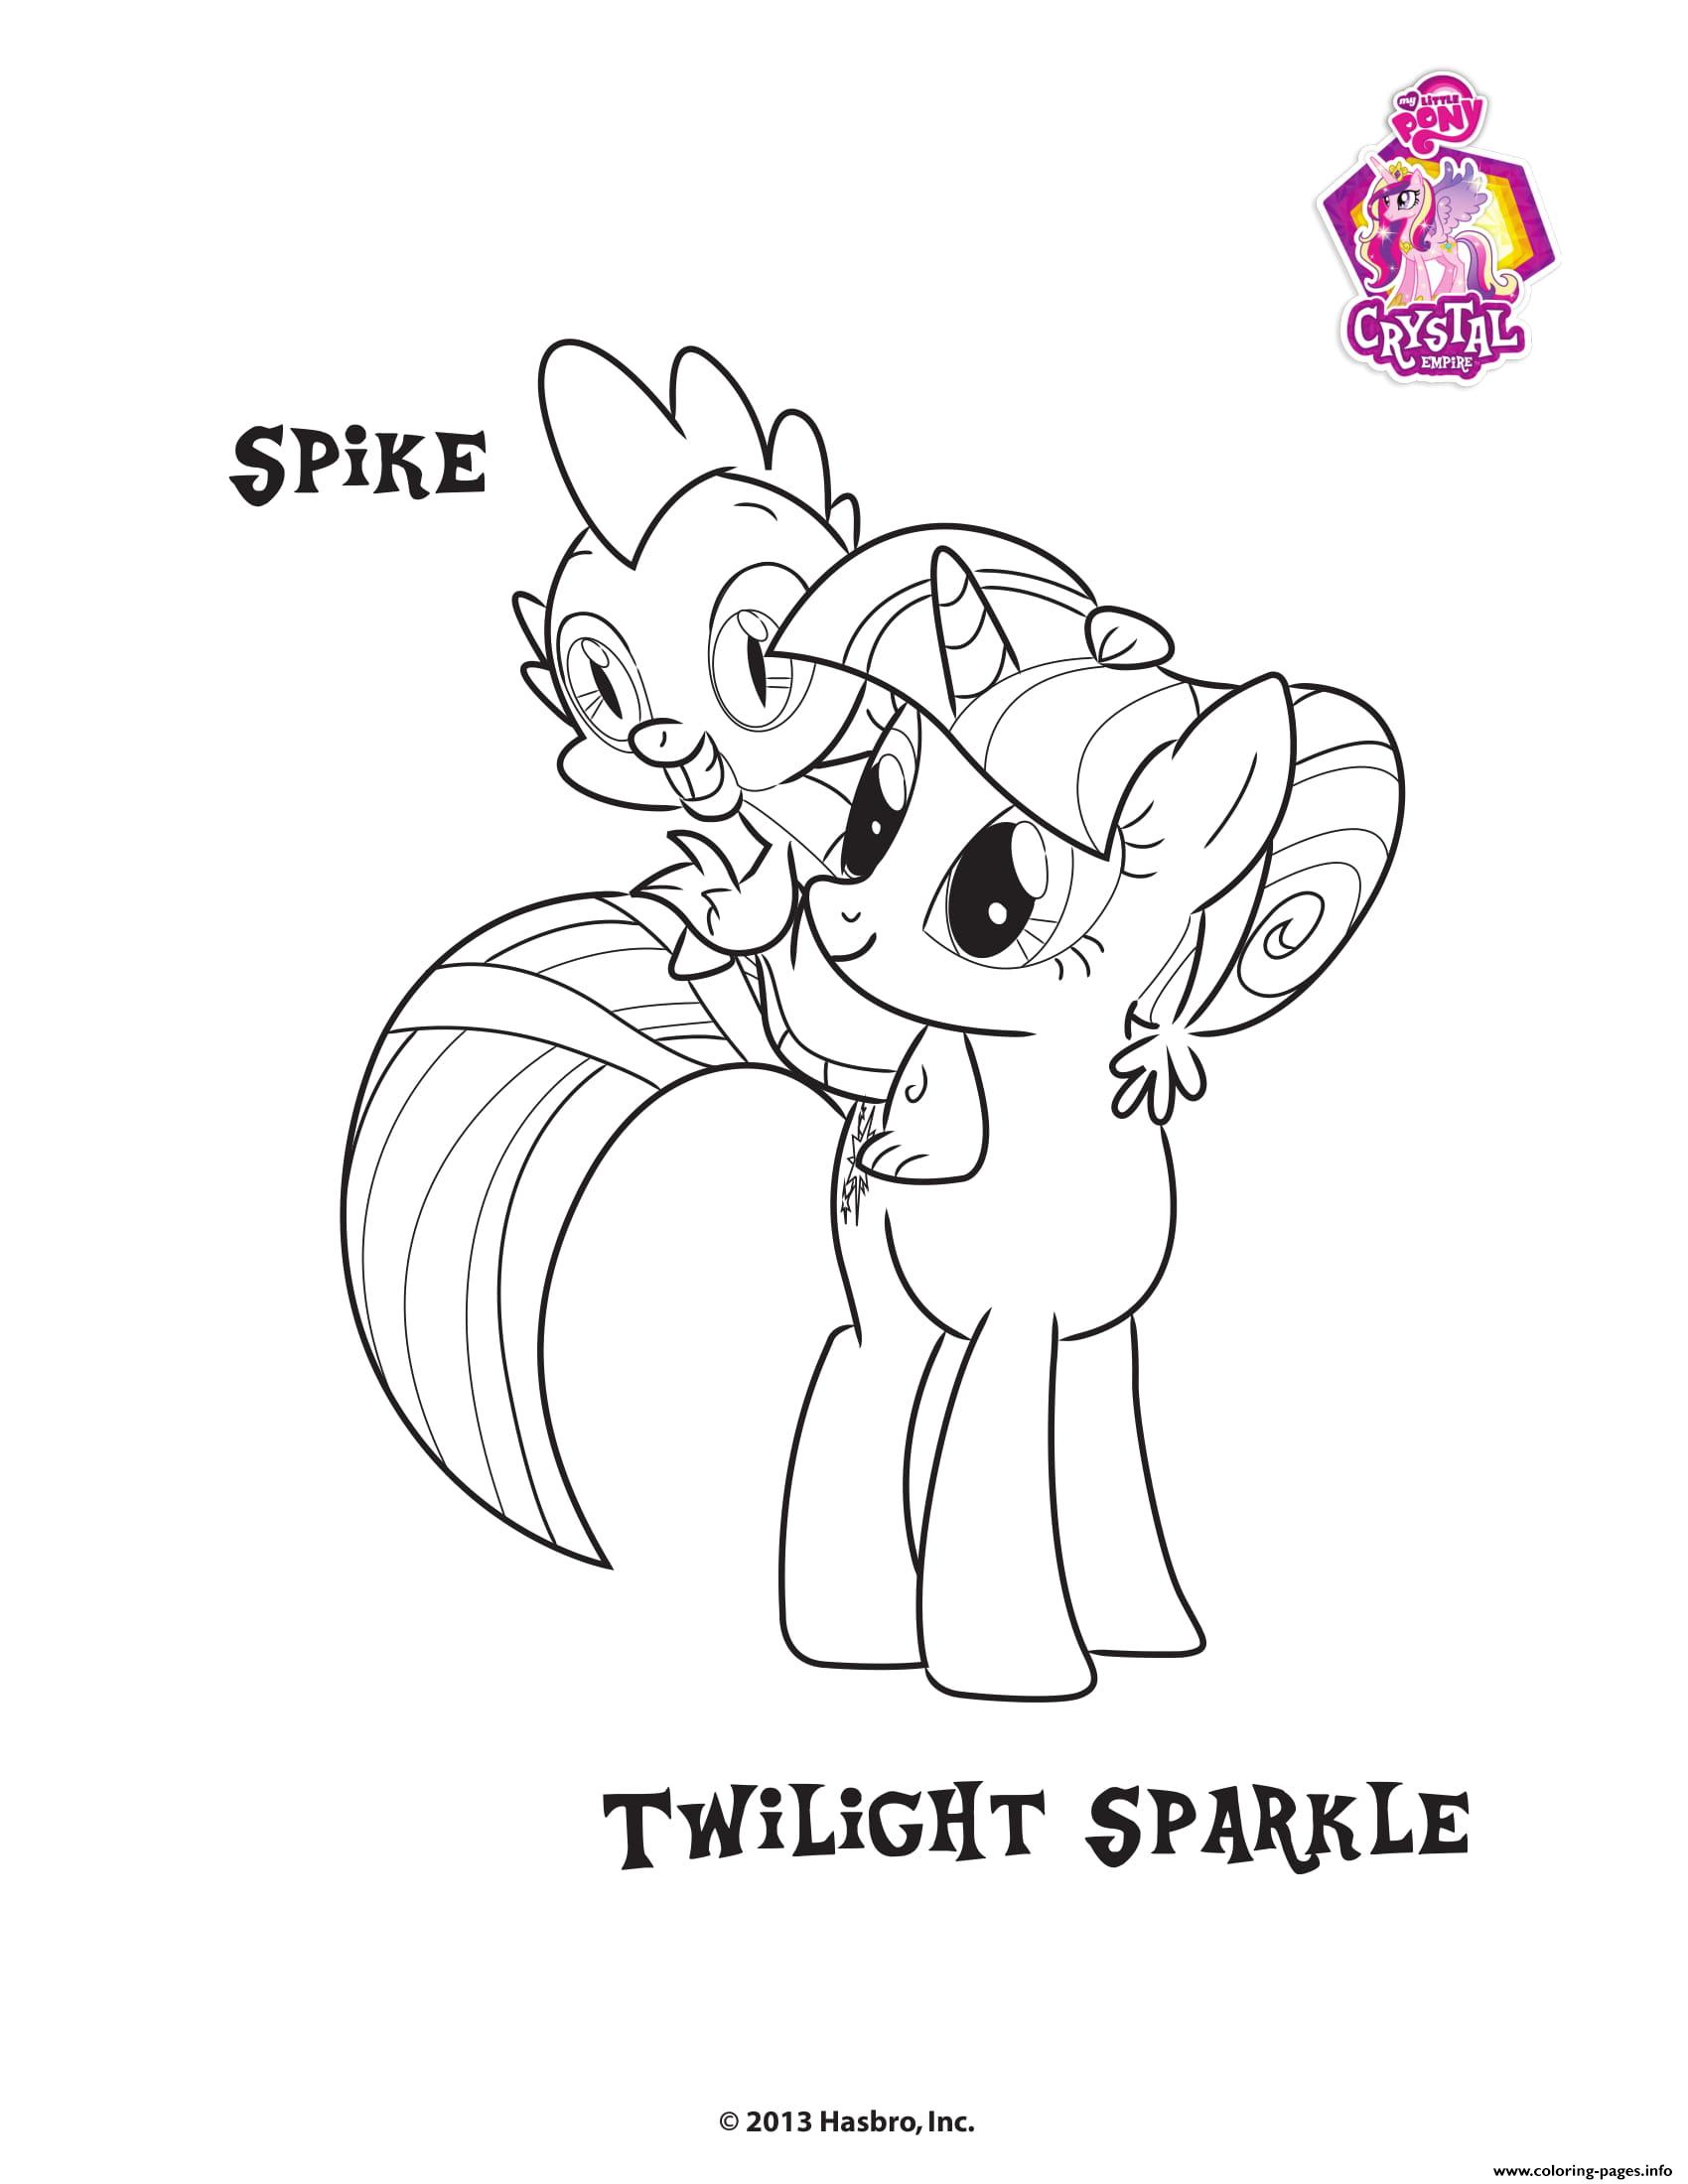 Spike Twilight Sparkle Empire Crystal coloring